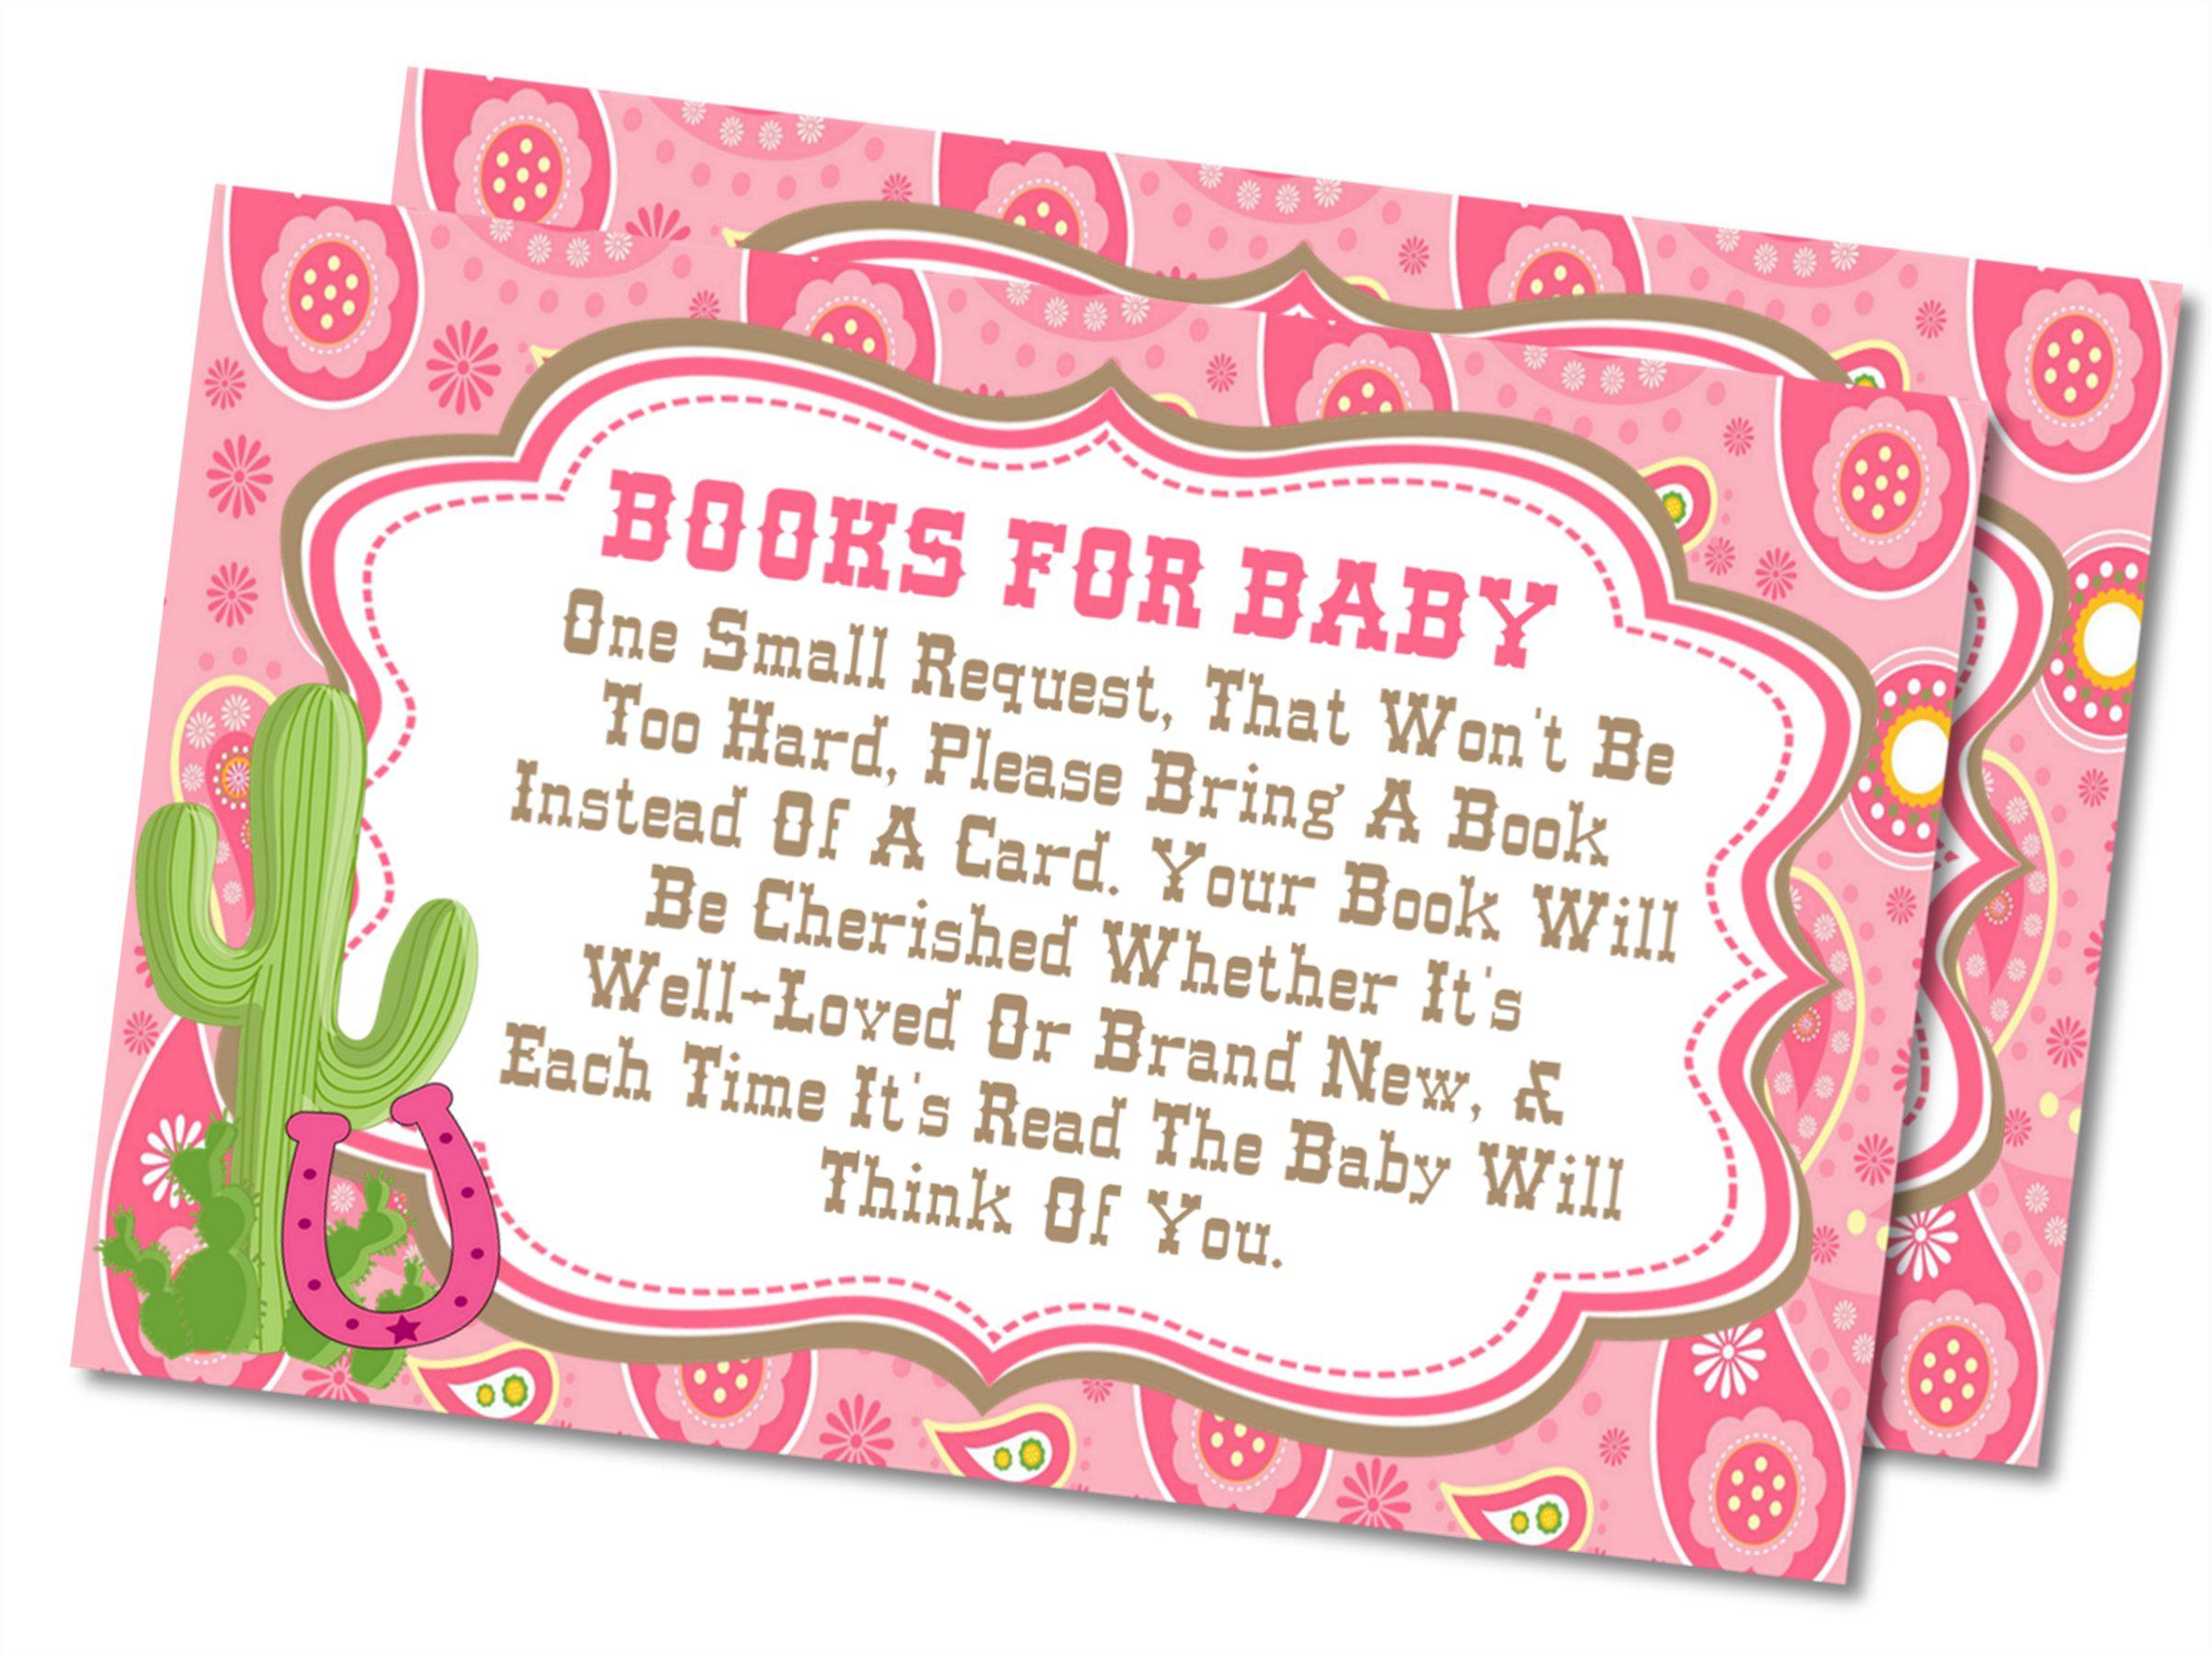 Cowgirl Book Request Cards